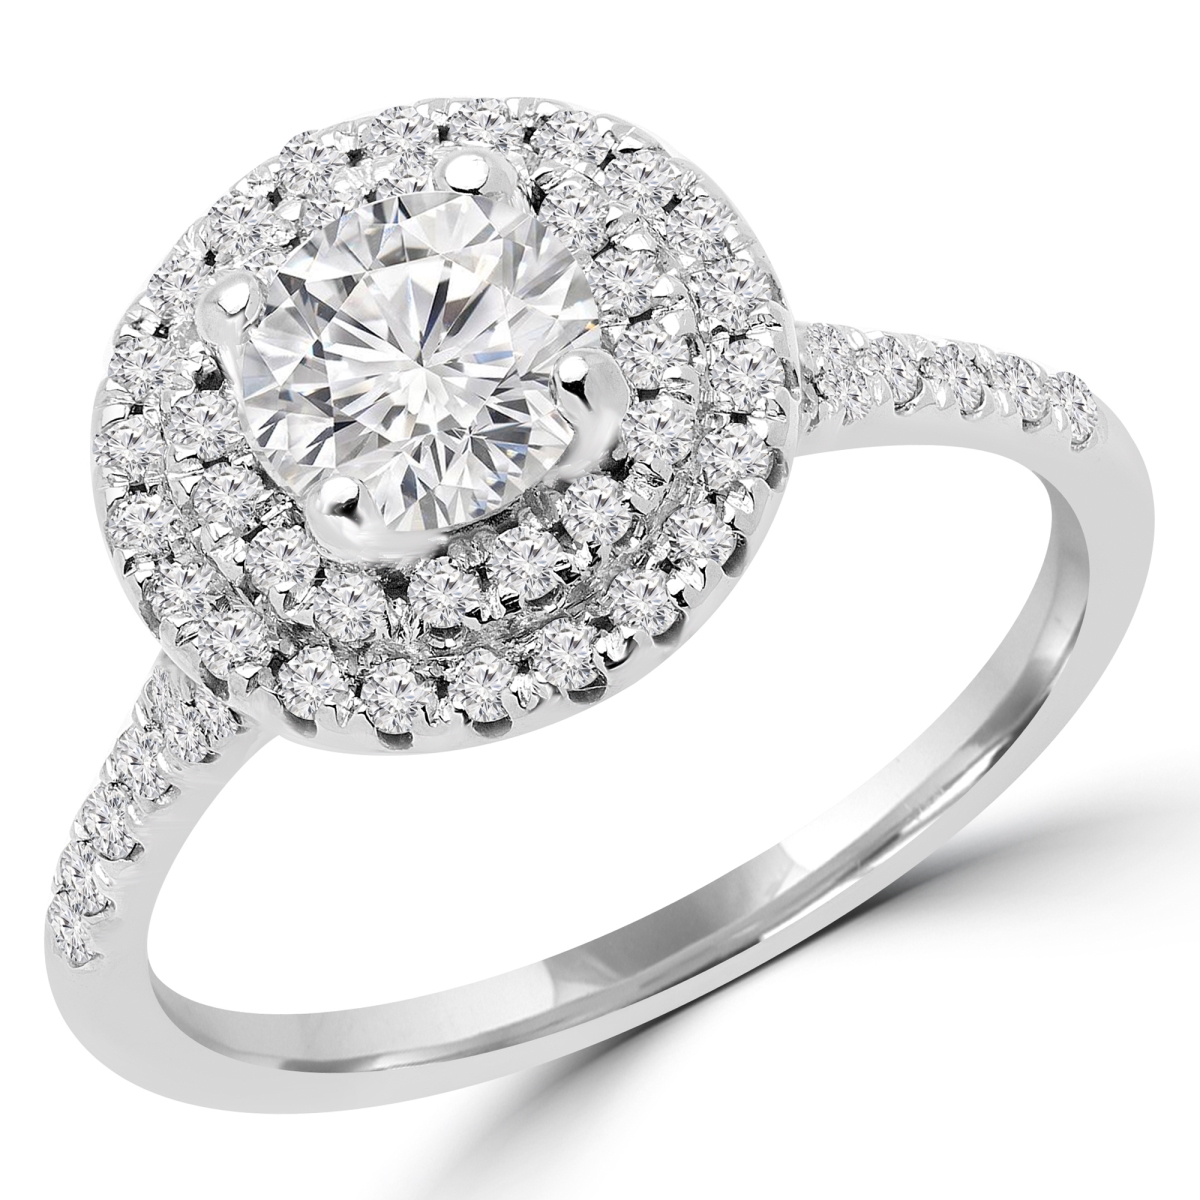 Picture of Majesty Diamonds MD180461-P 1.2 CTW Round Diamond Halo Engagement Ring in 14K White Gold